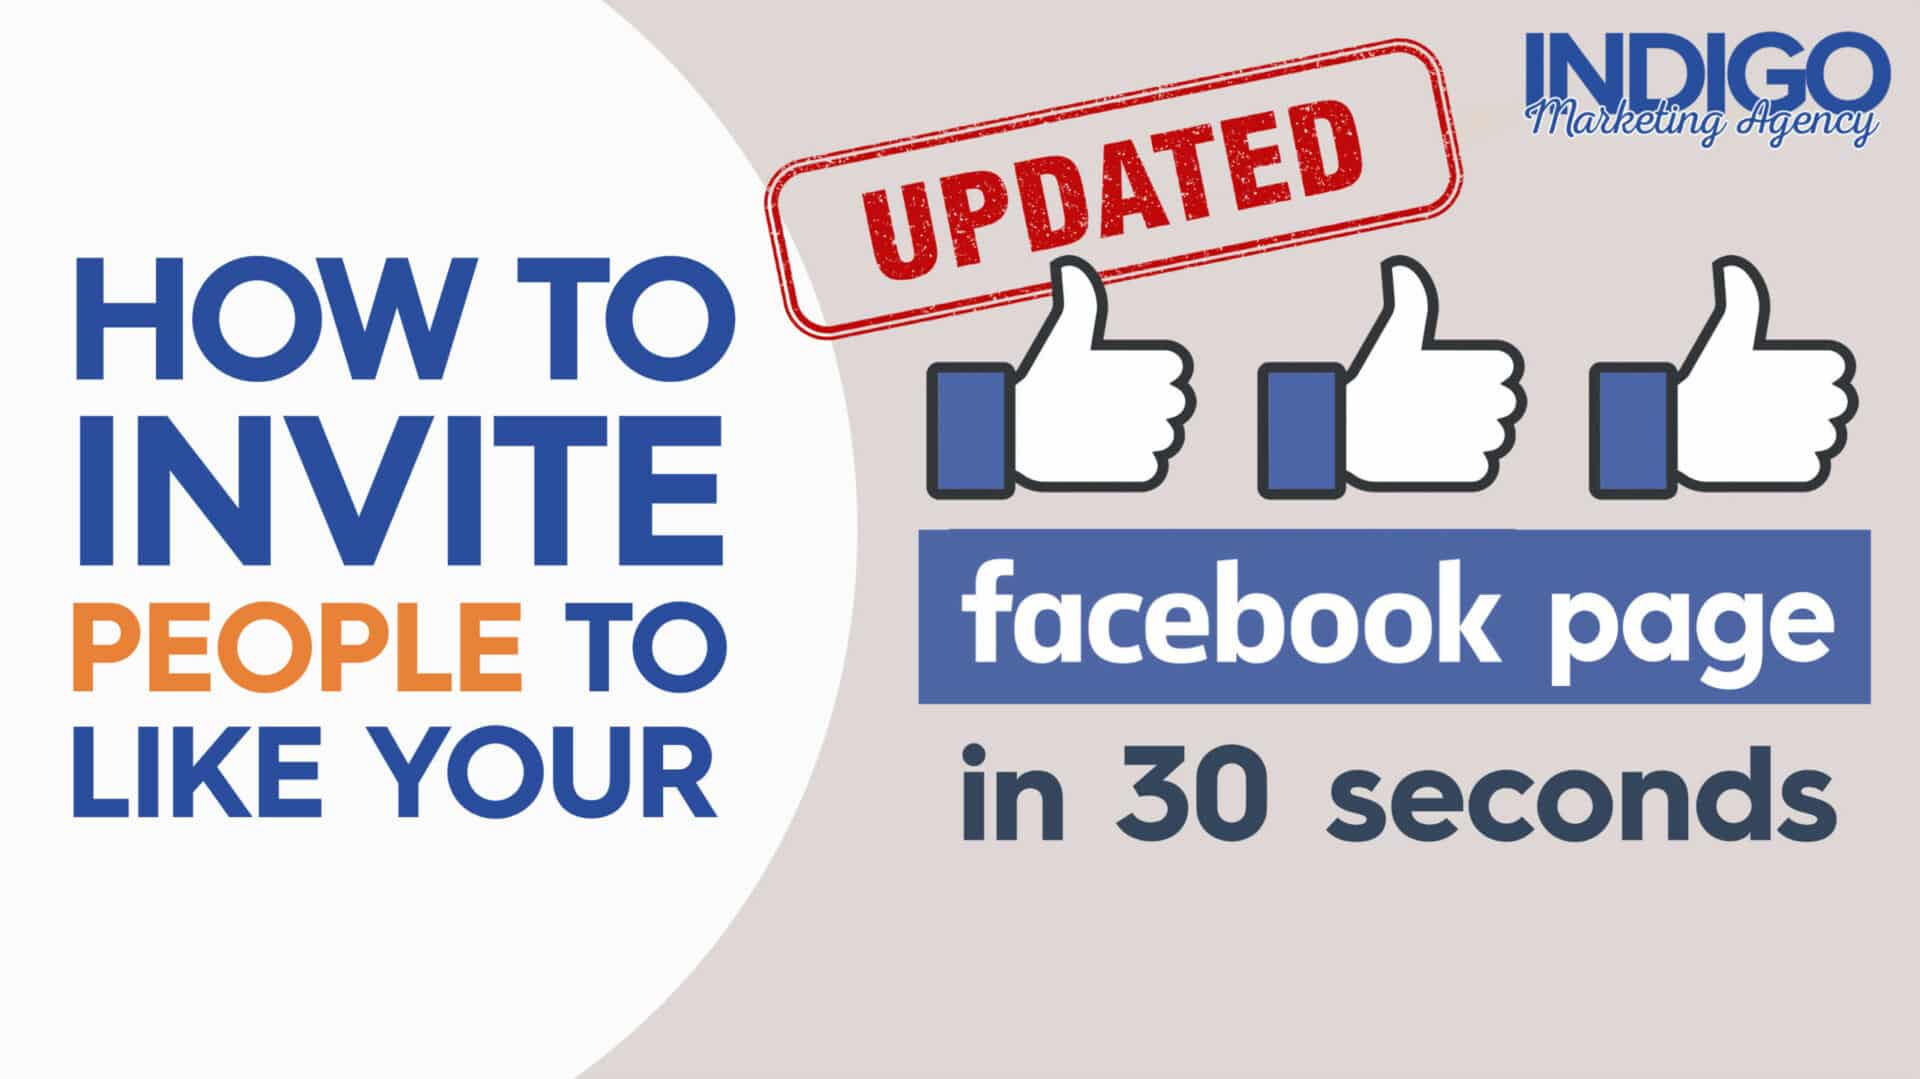 How to Invite People to Like Your Facebook Page